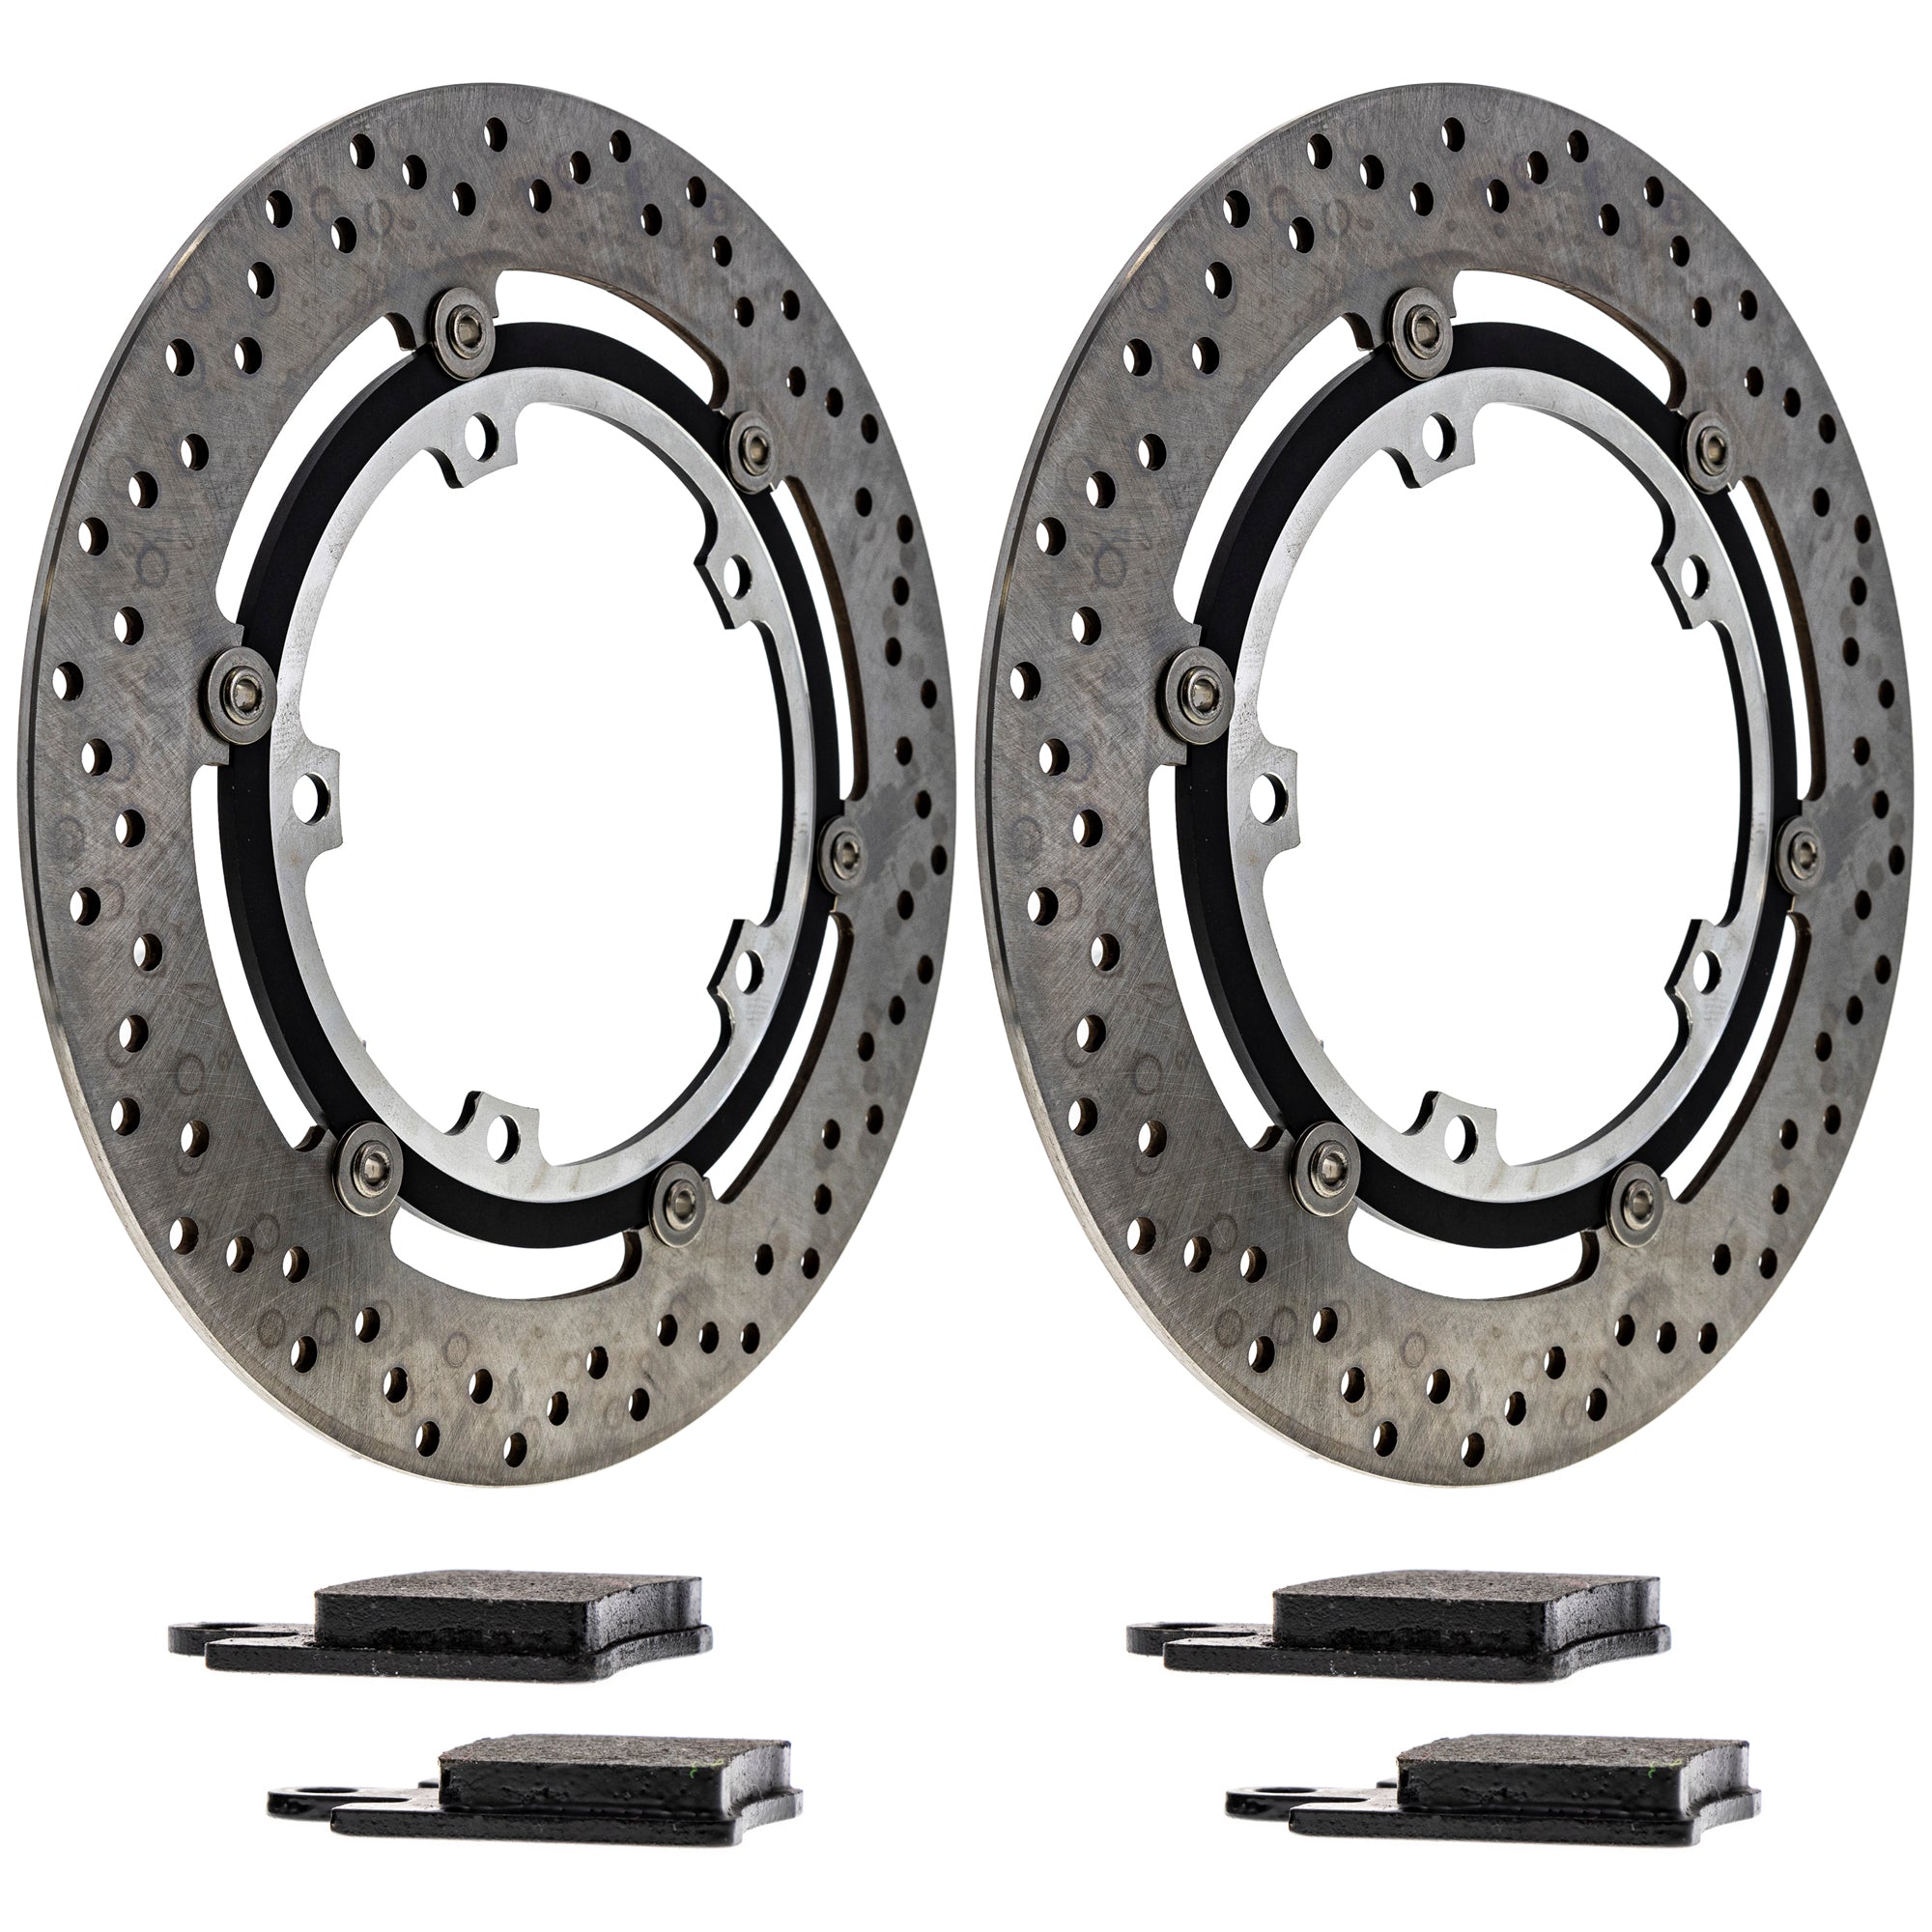 Front Brake Rotors and Pads Kit for zOTHER Polaris 3P6-W0045-00-00 T2022395 NICHE MK1007278